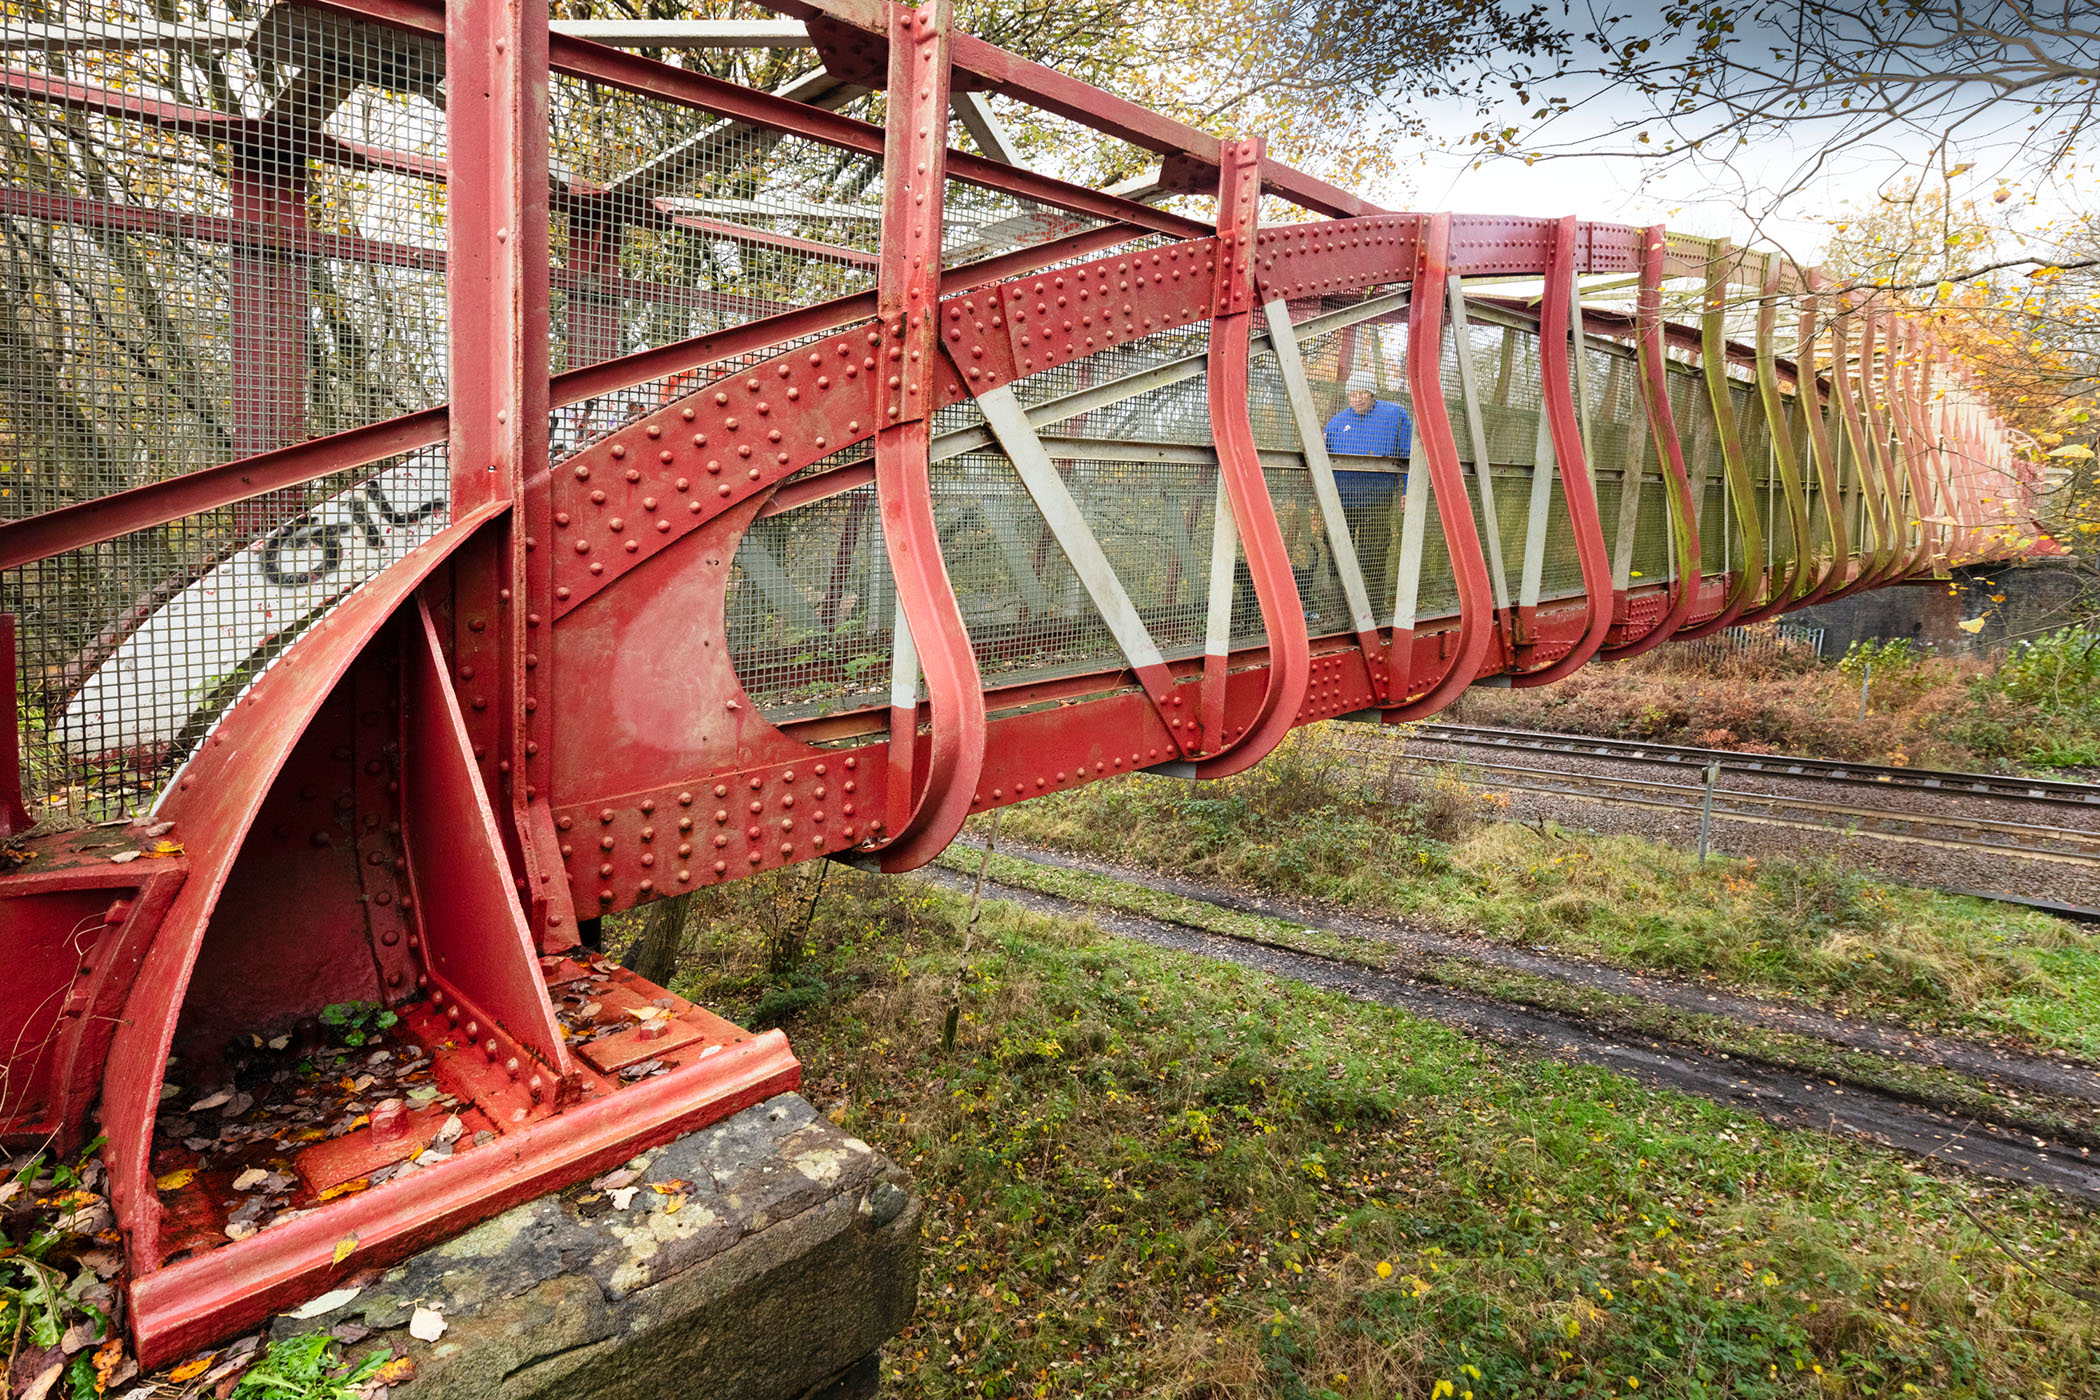 General view of a railway footbridge with red ironwork